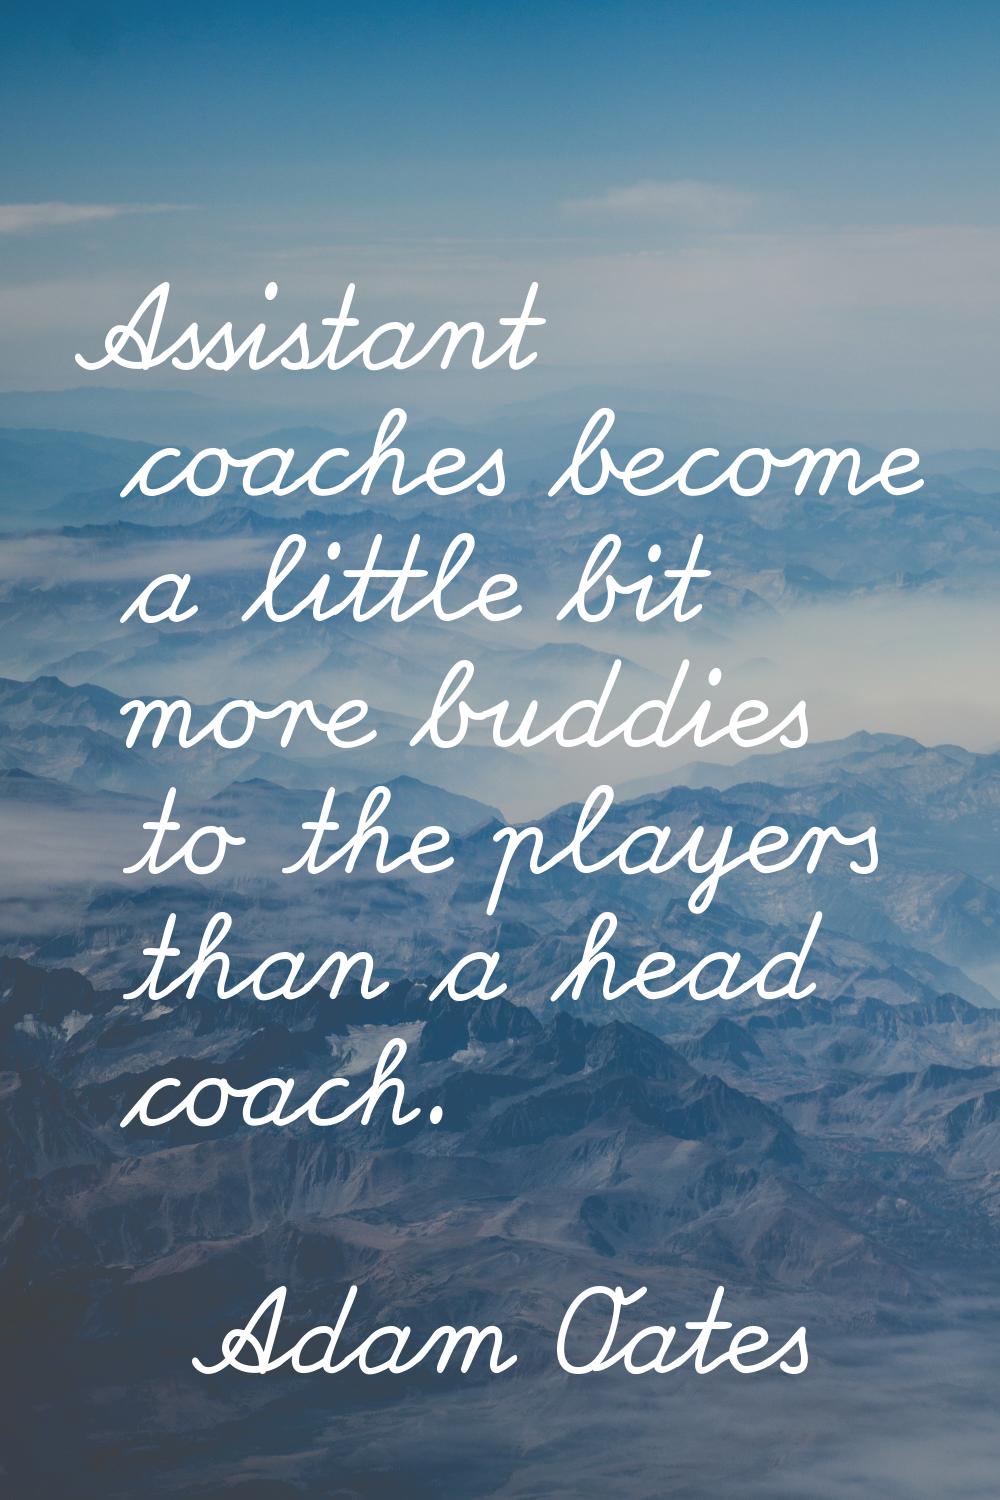 Assistant coaches become a little bit more buddies to the players than a head coach.